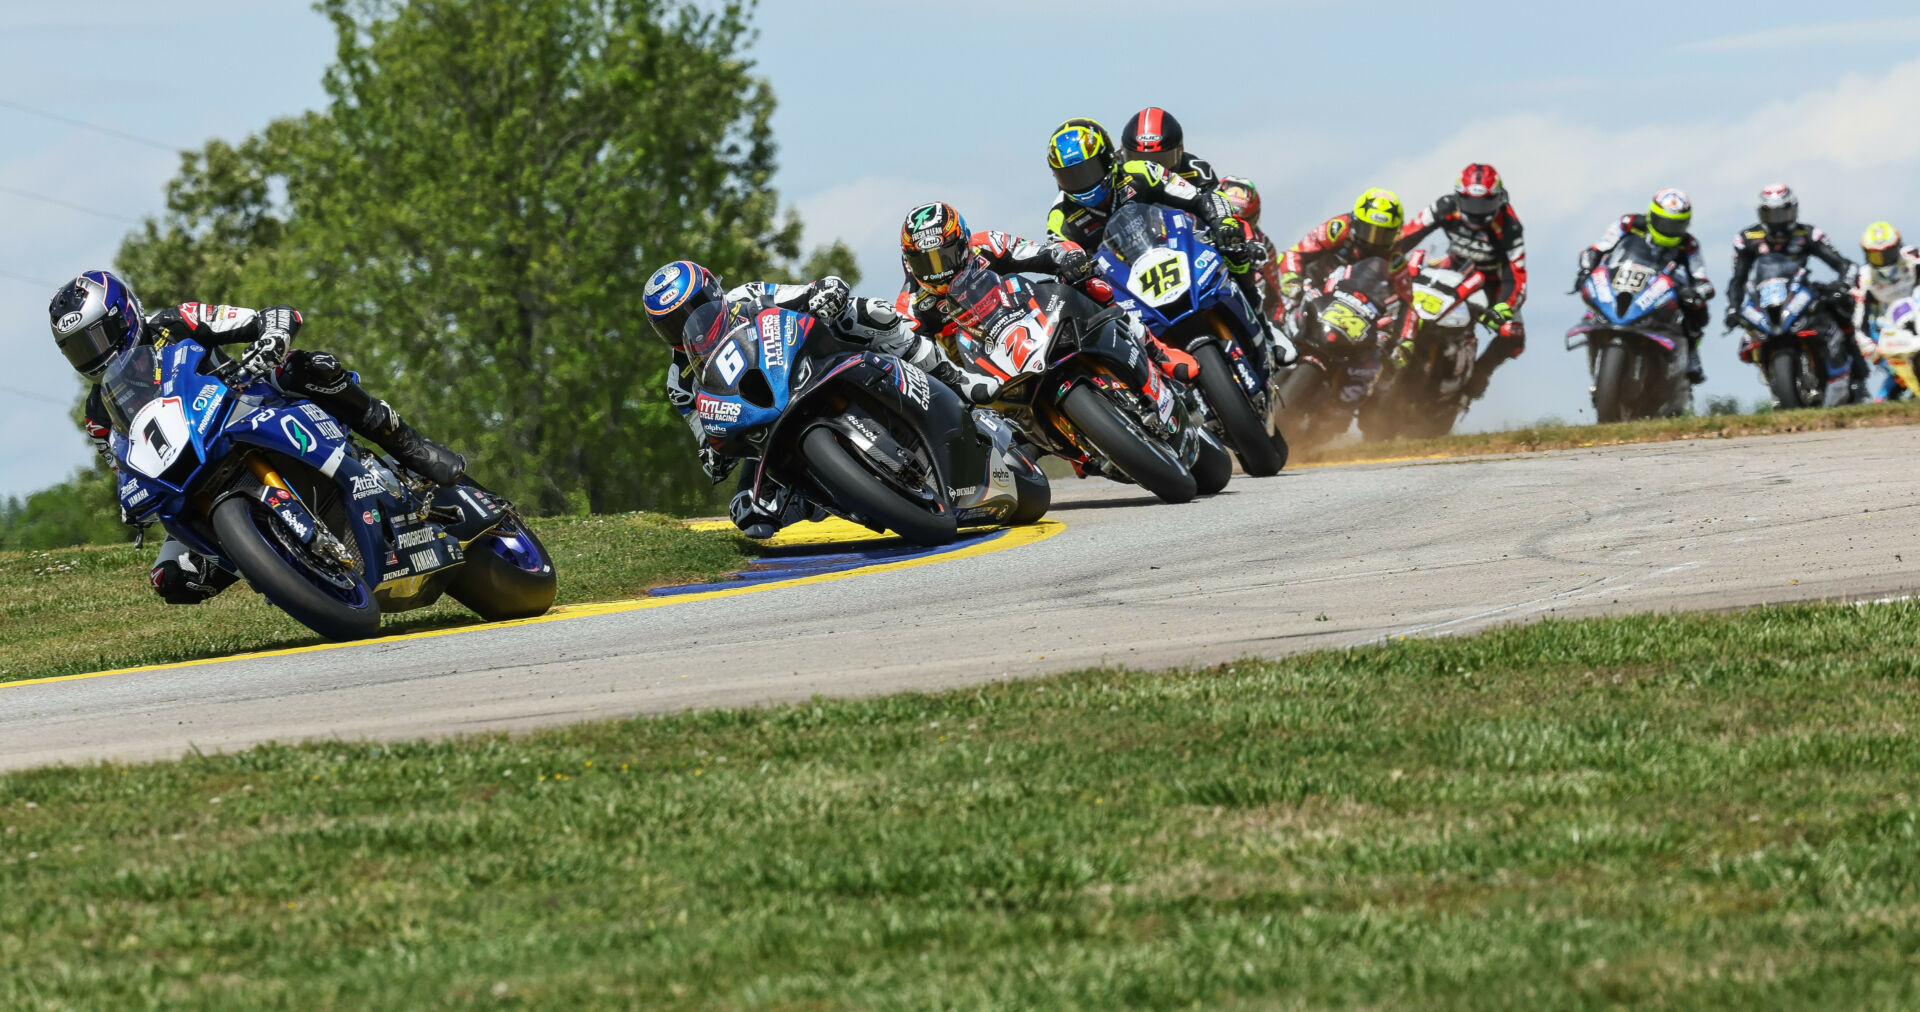 The boys are back in town: Jake Gagne (1), Cameron Beaubier (6), Josh Herrin (2), Cameron Petersen (45) and the rest of the Steel Commander Superbike class will begin its season at Michelin Raceway Road Atlanta, April 19-21. Photo by Brian J. Nelson.